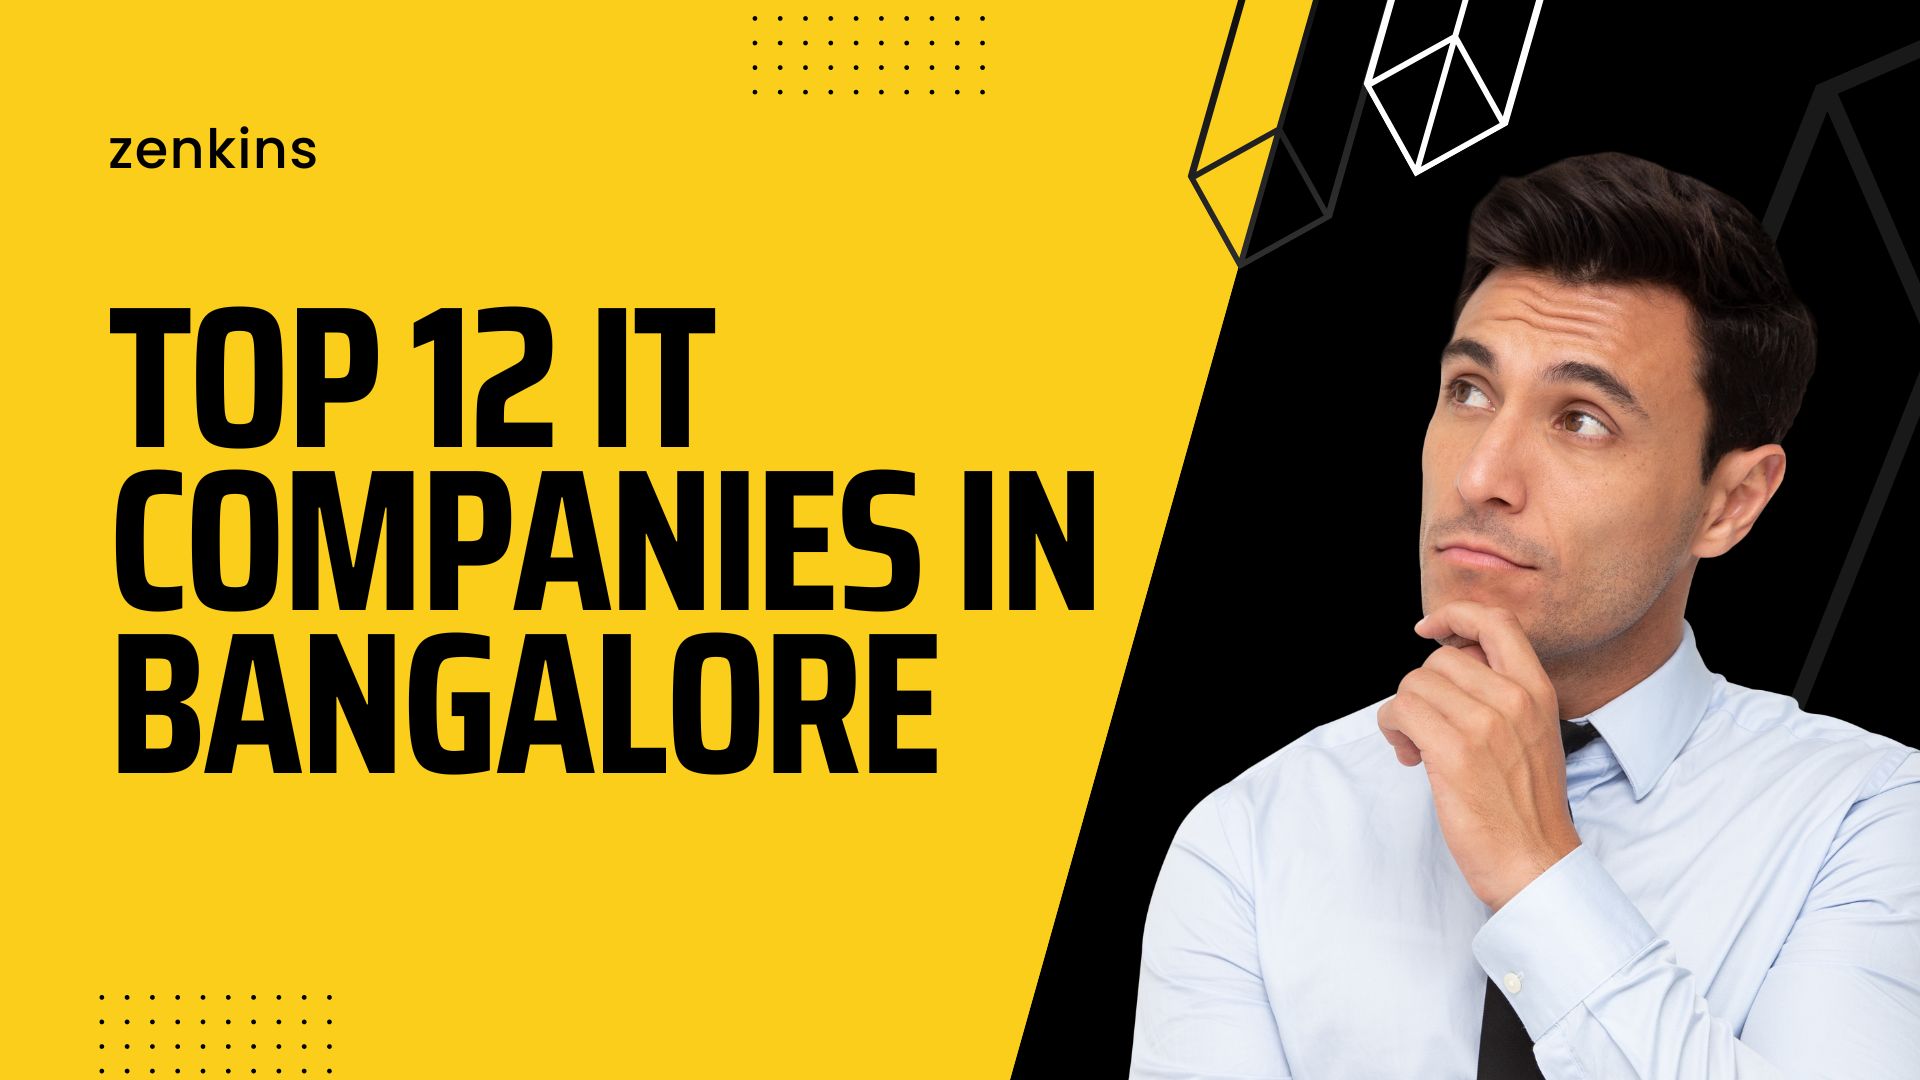 Top 12 IT Companies in Bangalore